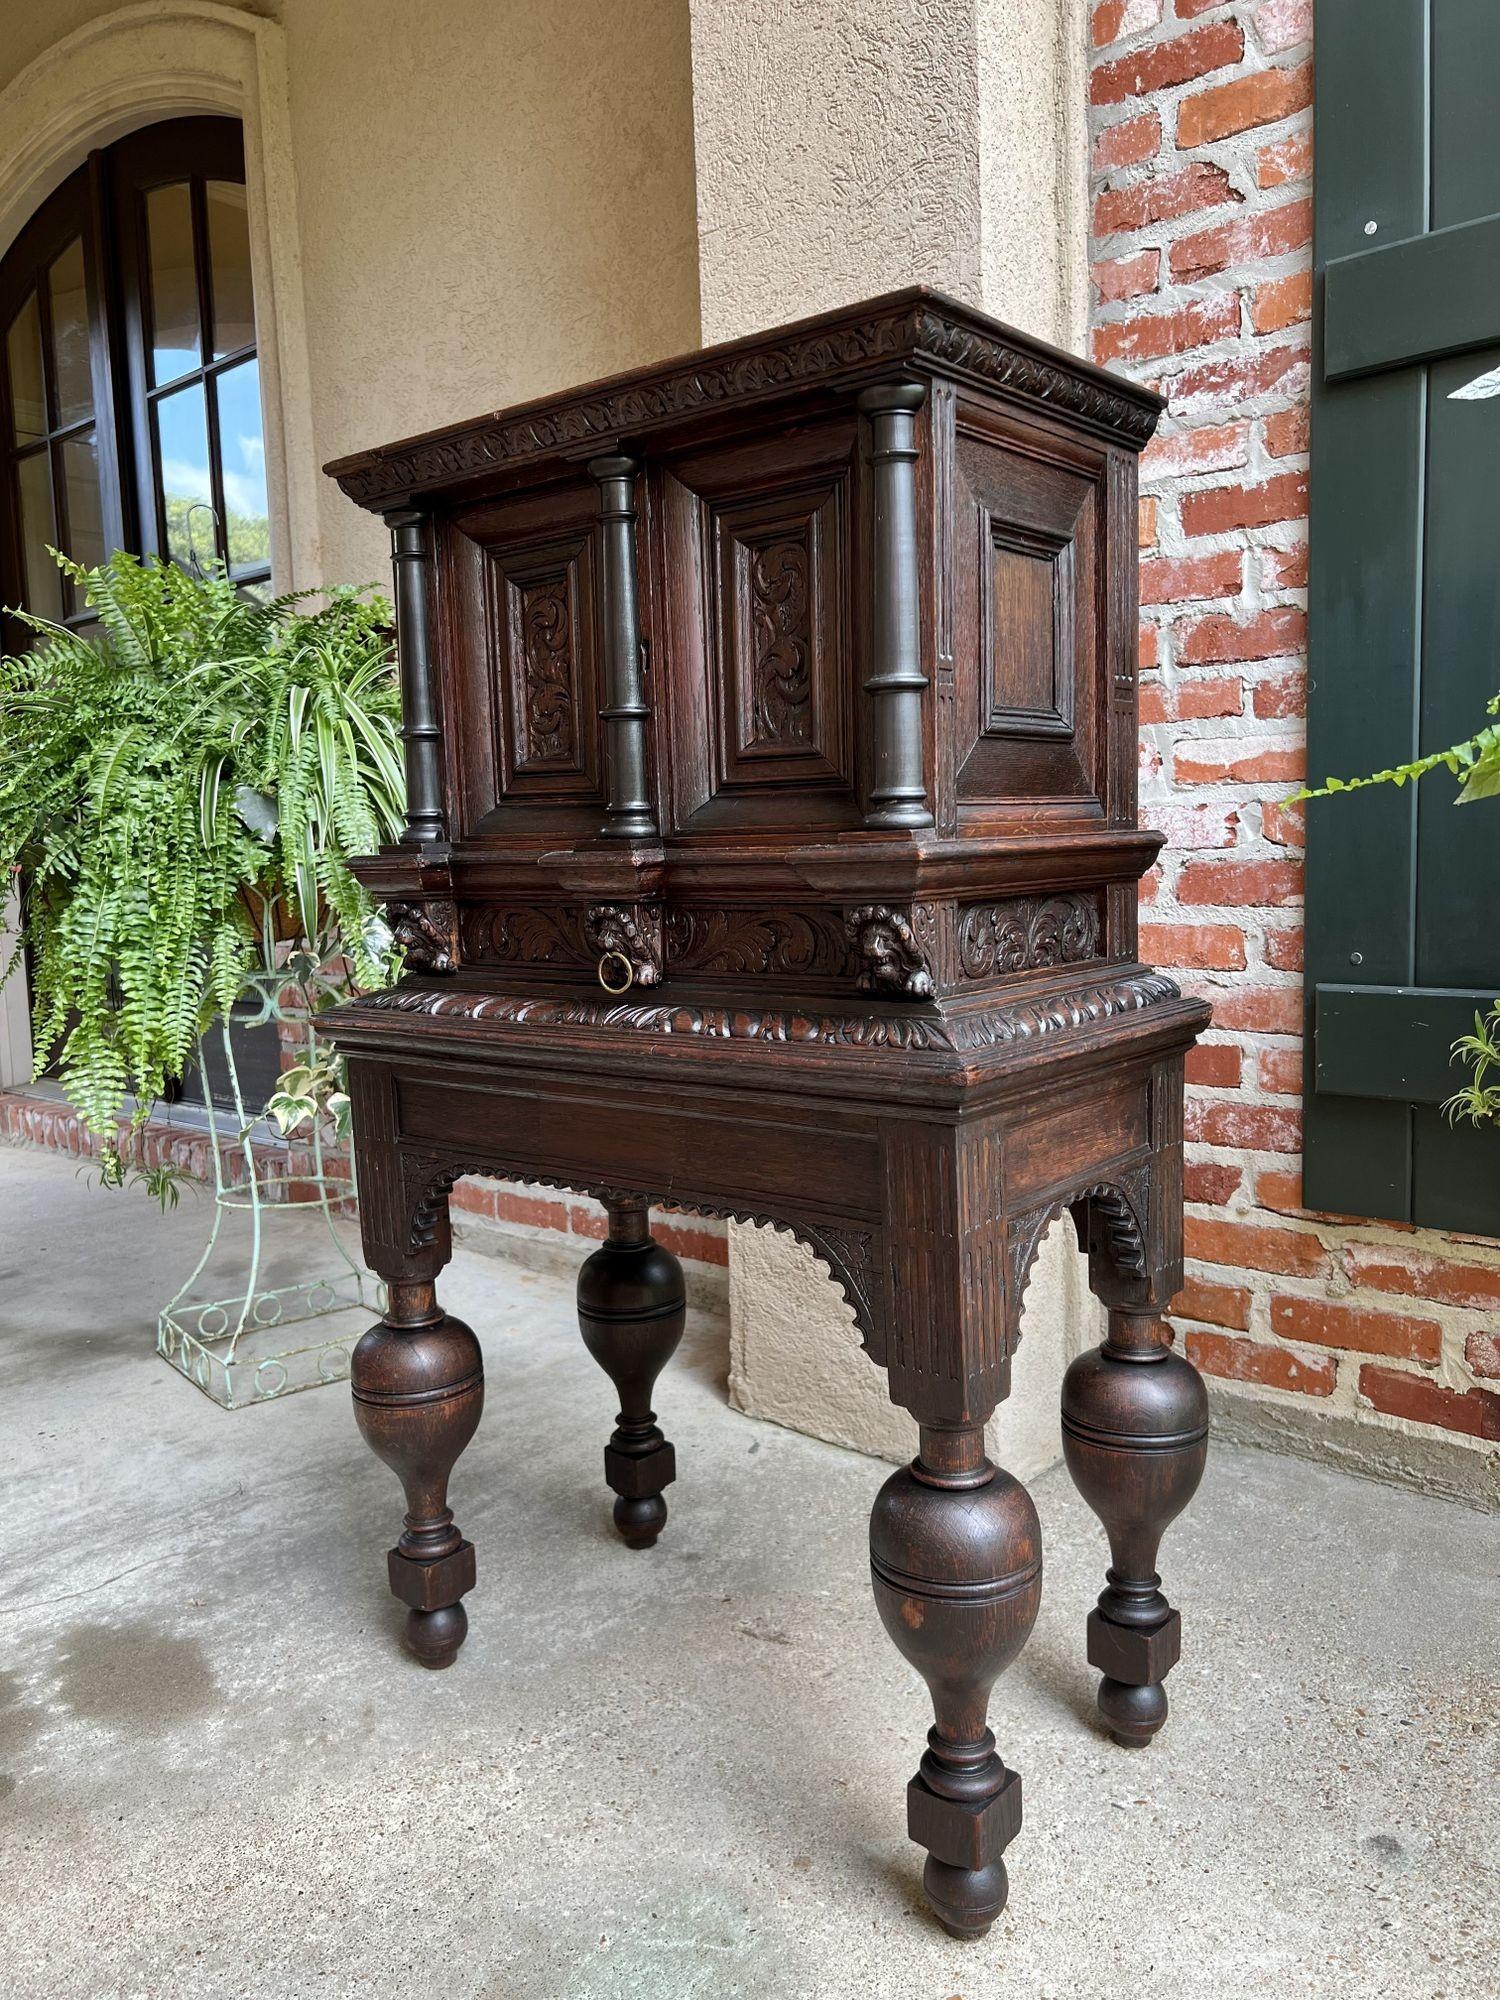 19th century French carved oak cabinet vestry altar wine renaissance dining room.
 
Direct from France, a beautiful 19th century carved cabinet, with a striking silhouette, in a versatile small size, perfect for use throughout today’s home!
Clients